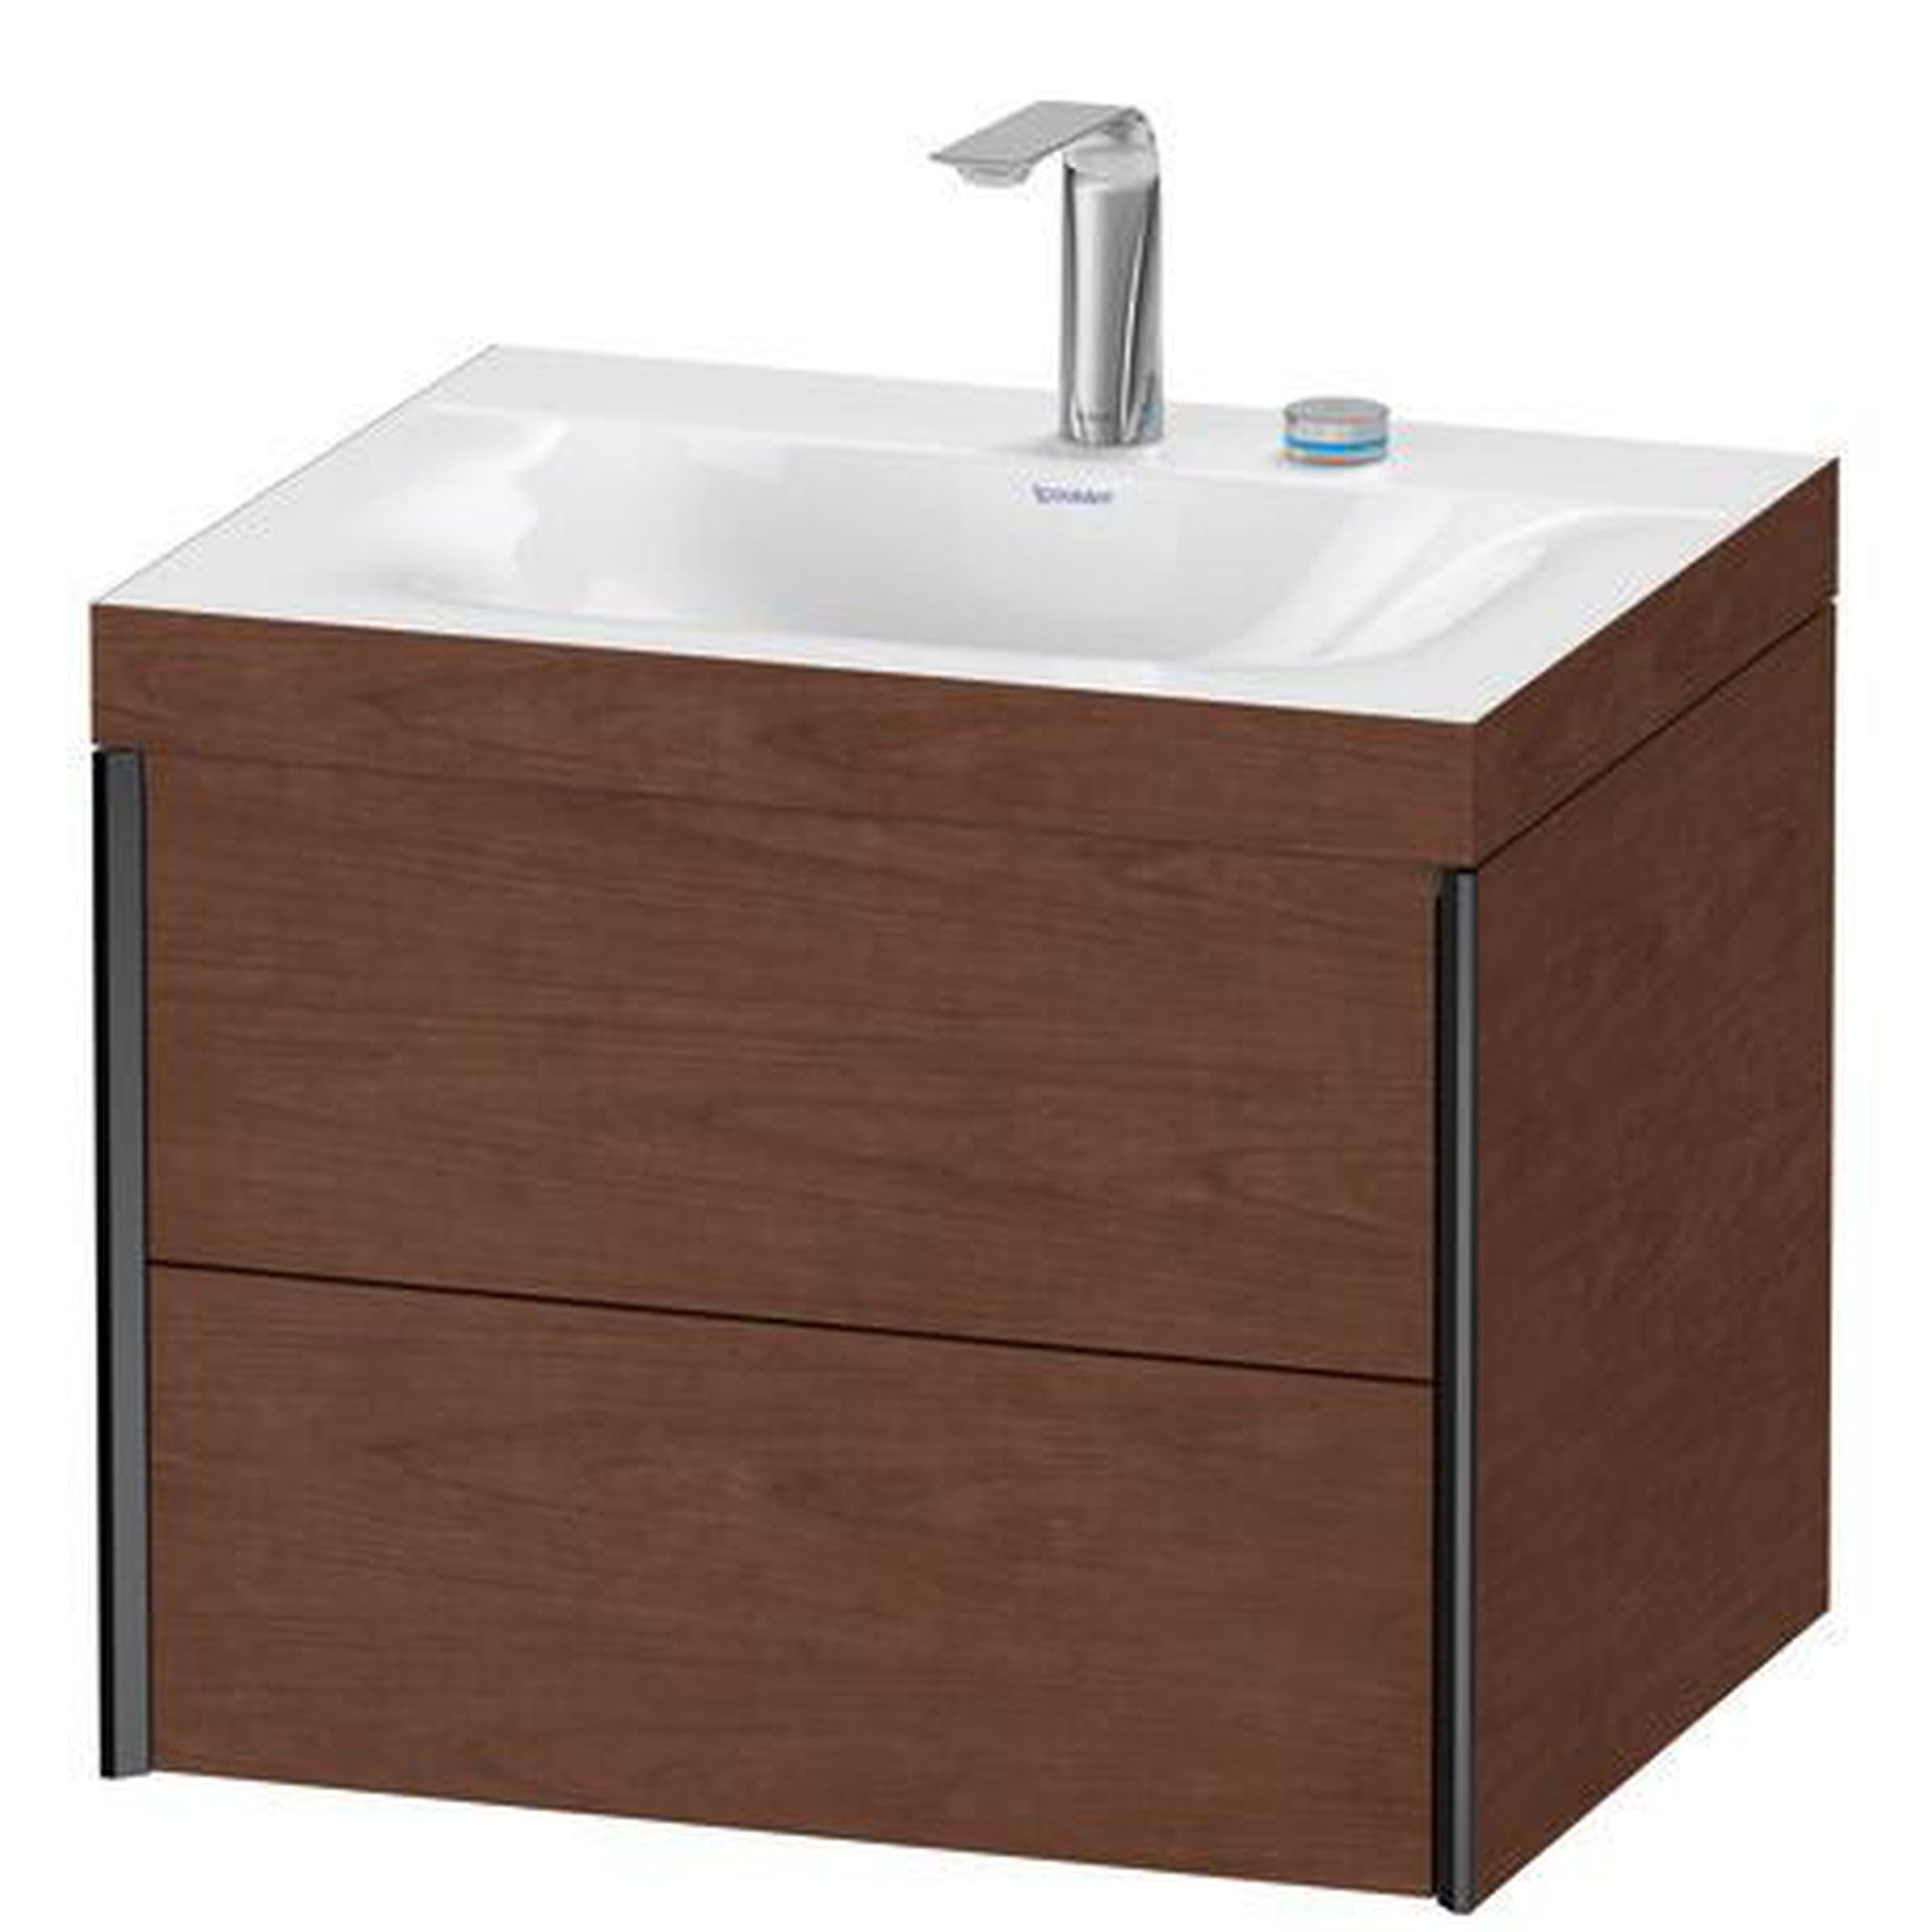 Duravit Xviu 24" x 20" x 19" Two Drawer C-Bonded Wall-Mount Vanity Kit With Two Tap Holes, American Walnut (XV4614EB213C)